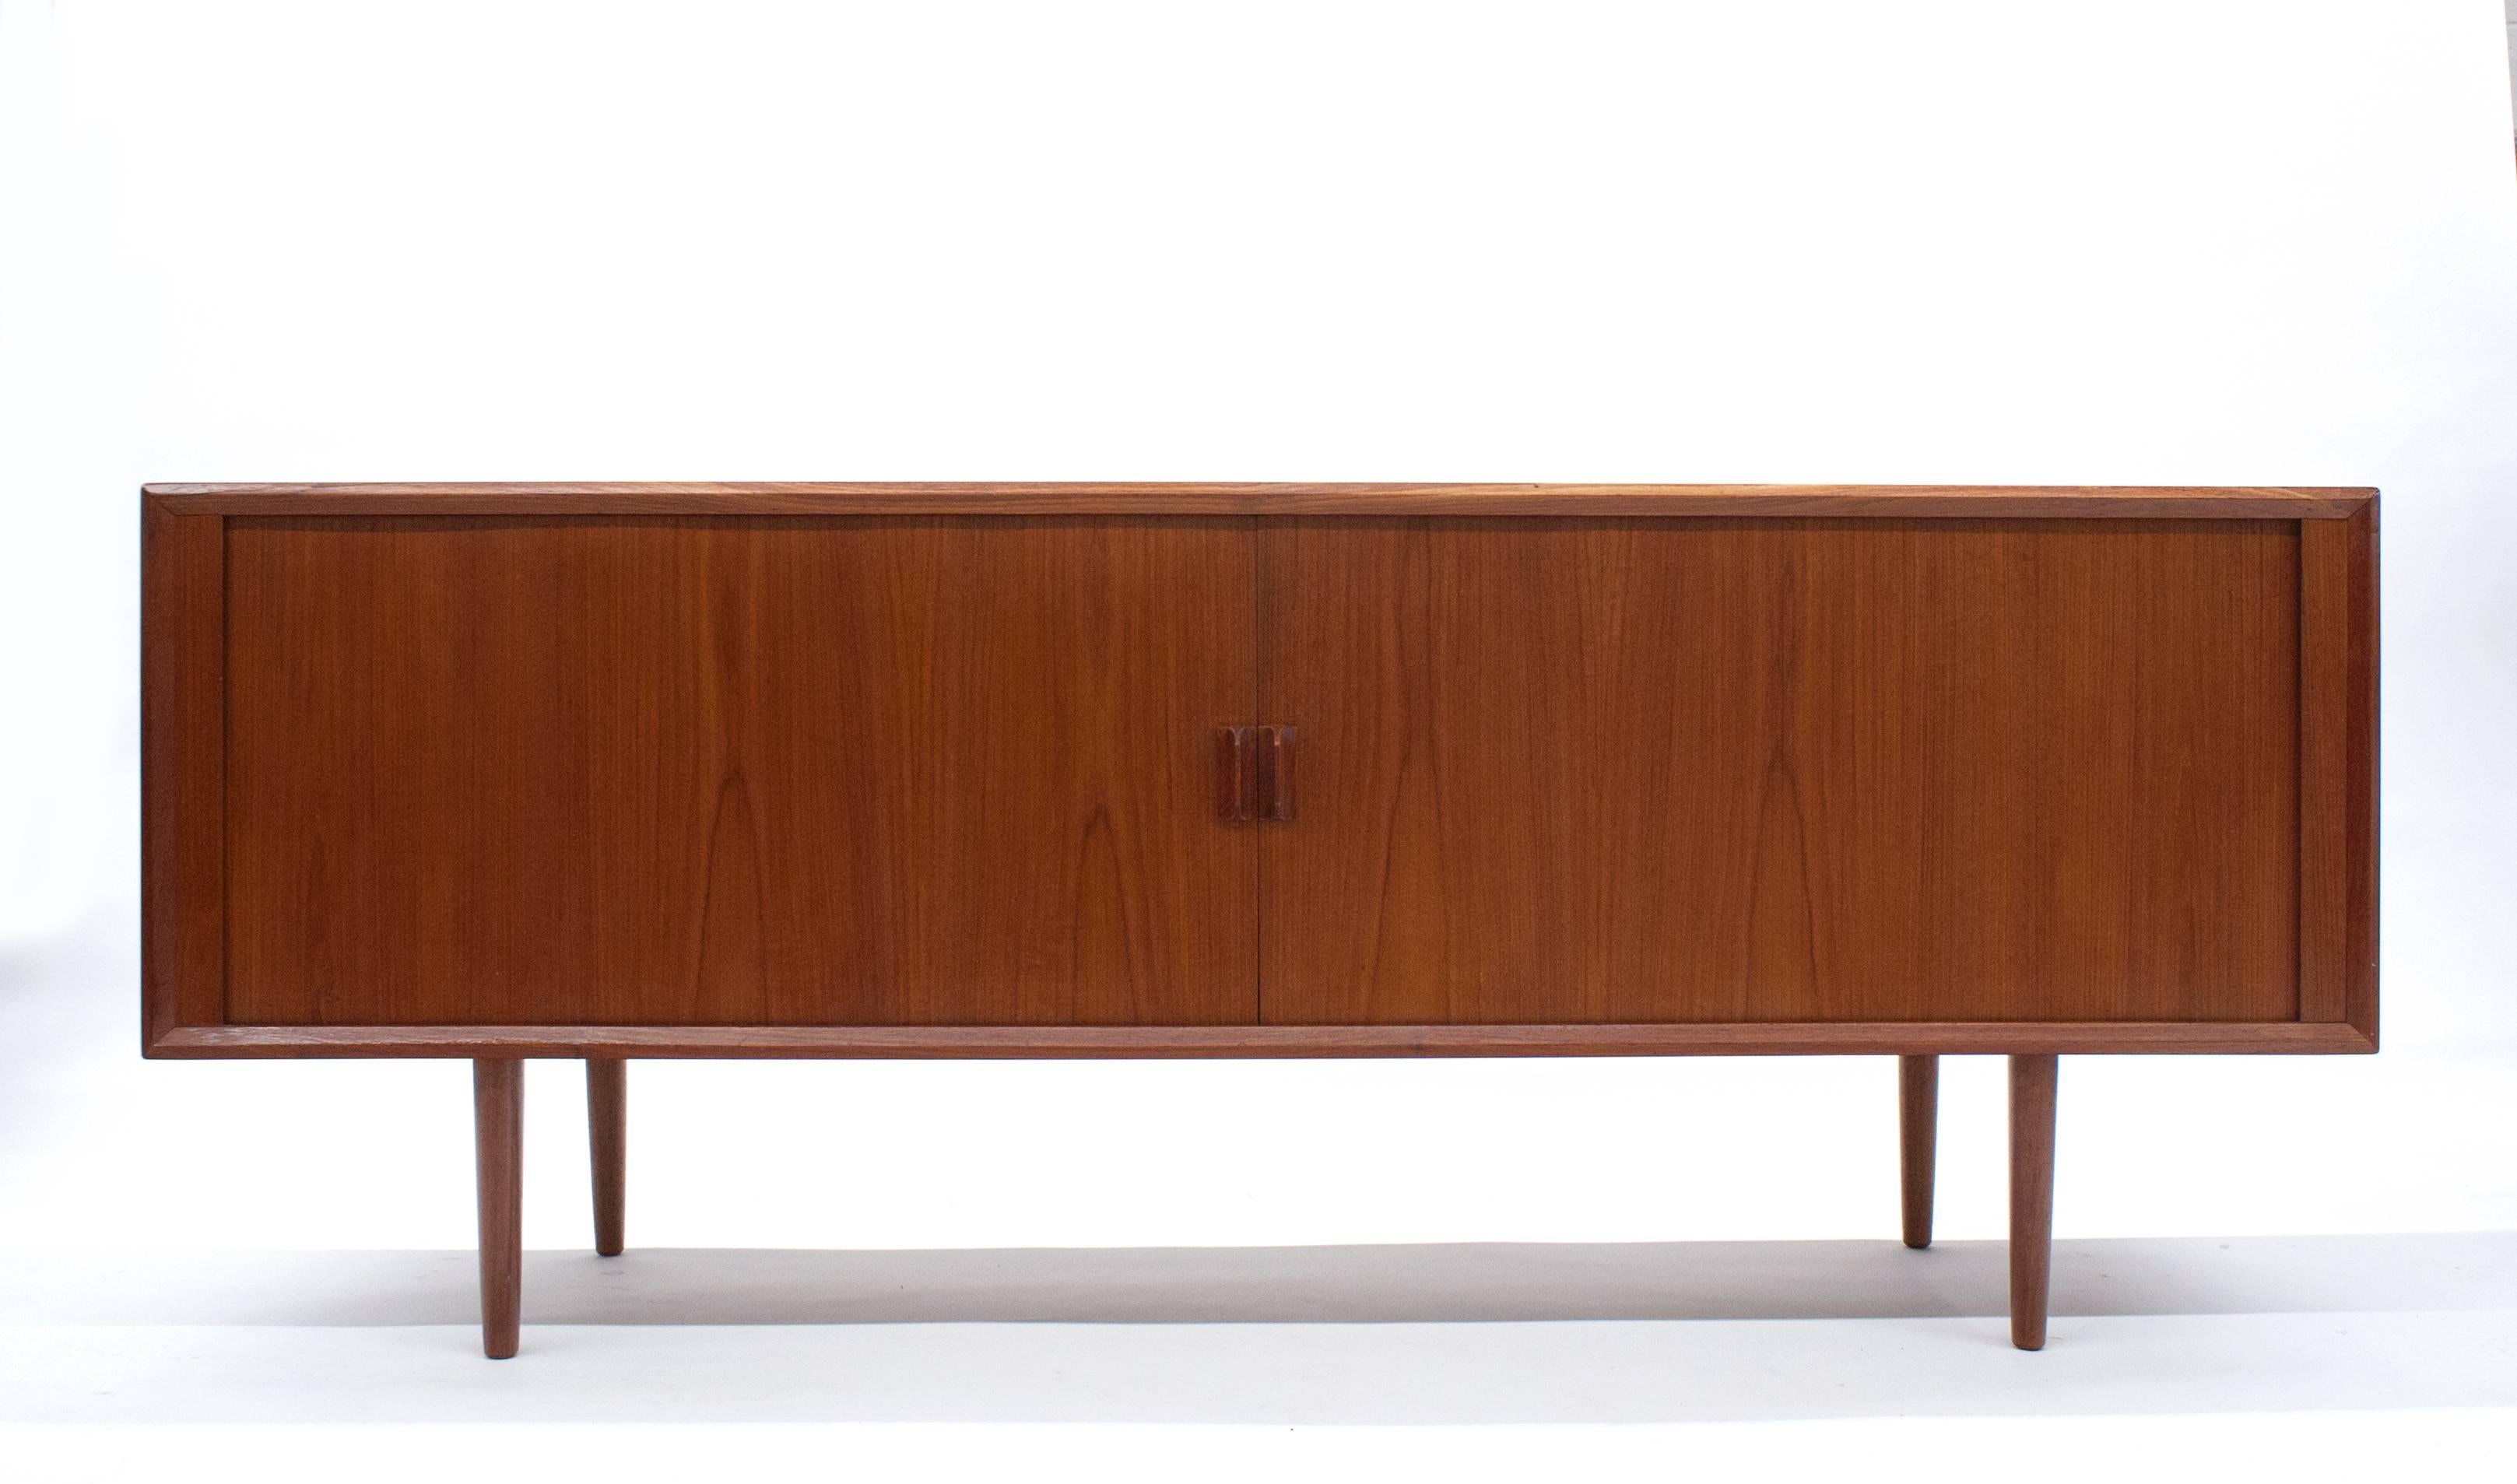 Teak sideboard by Svend Aage Larsen of Denmark. Highly functional with plenty of storage. Three interior shelves are adjustable. Sideboard has been extremely well cared for and is in excellent condition.  Tambour door slides with ease. It's a great